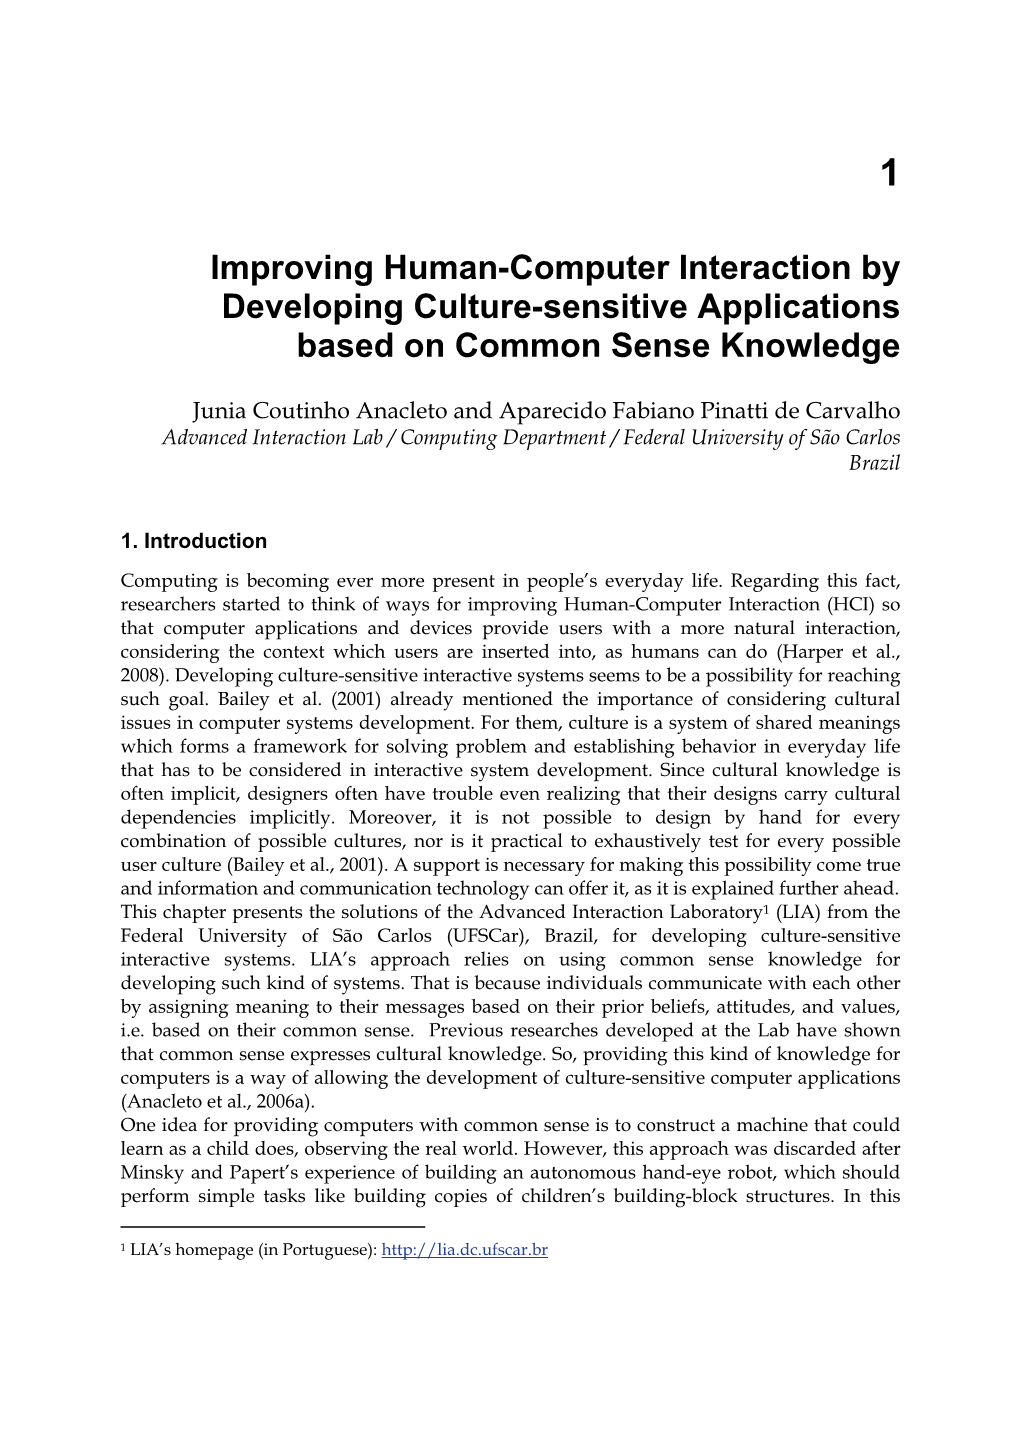 Improving Human-Computer Interaction by Developing Culture-Sensitive Applications Based on Common Sense Knowledge